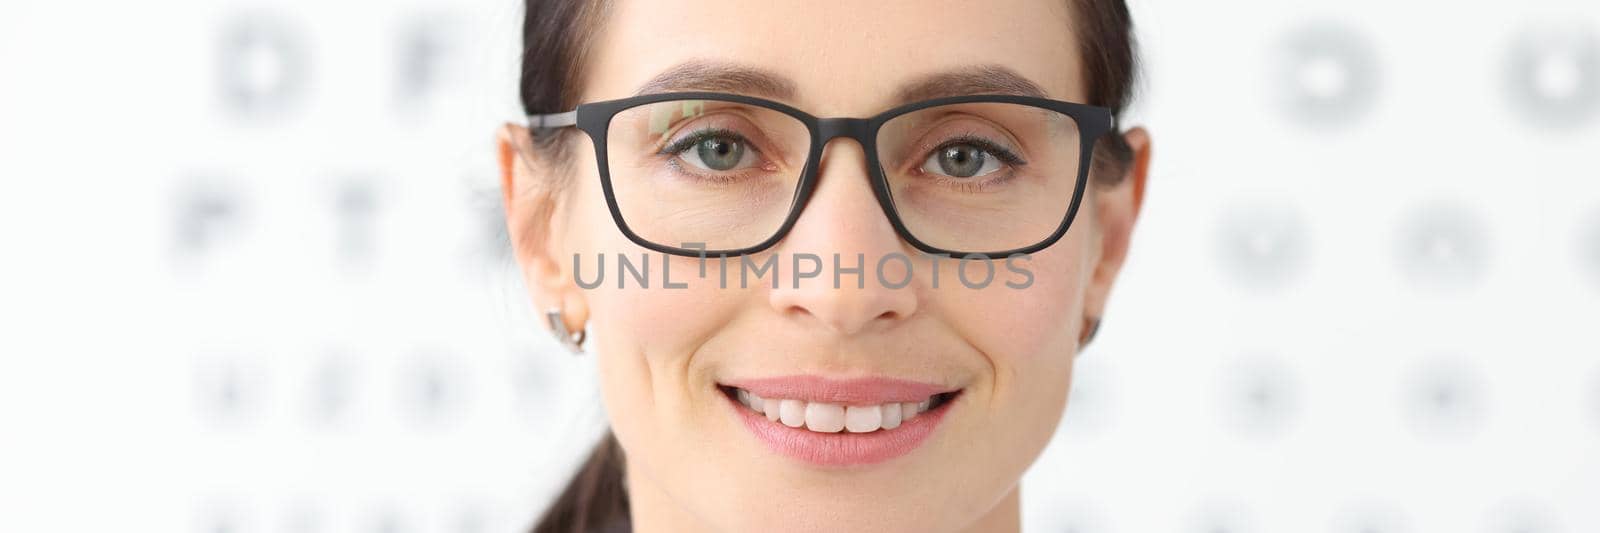 Woman ophthalmologist with glasses standing against background of table for eye test by kuprevich